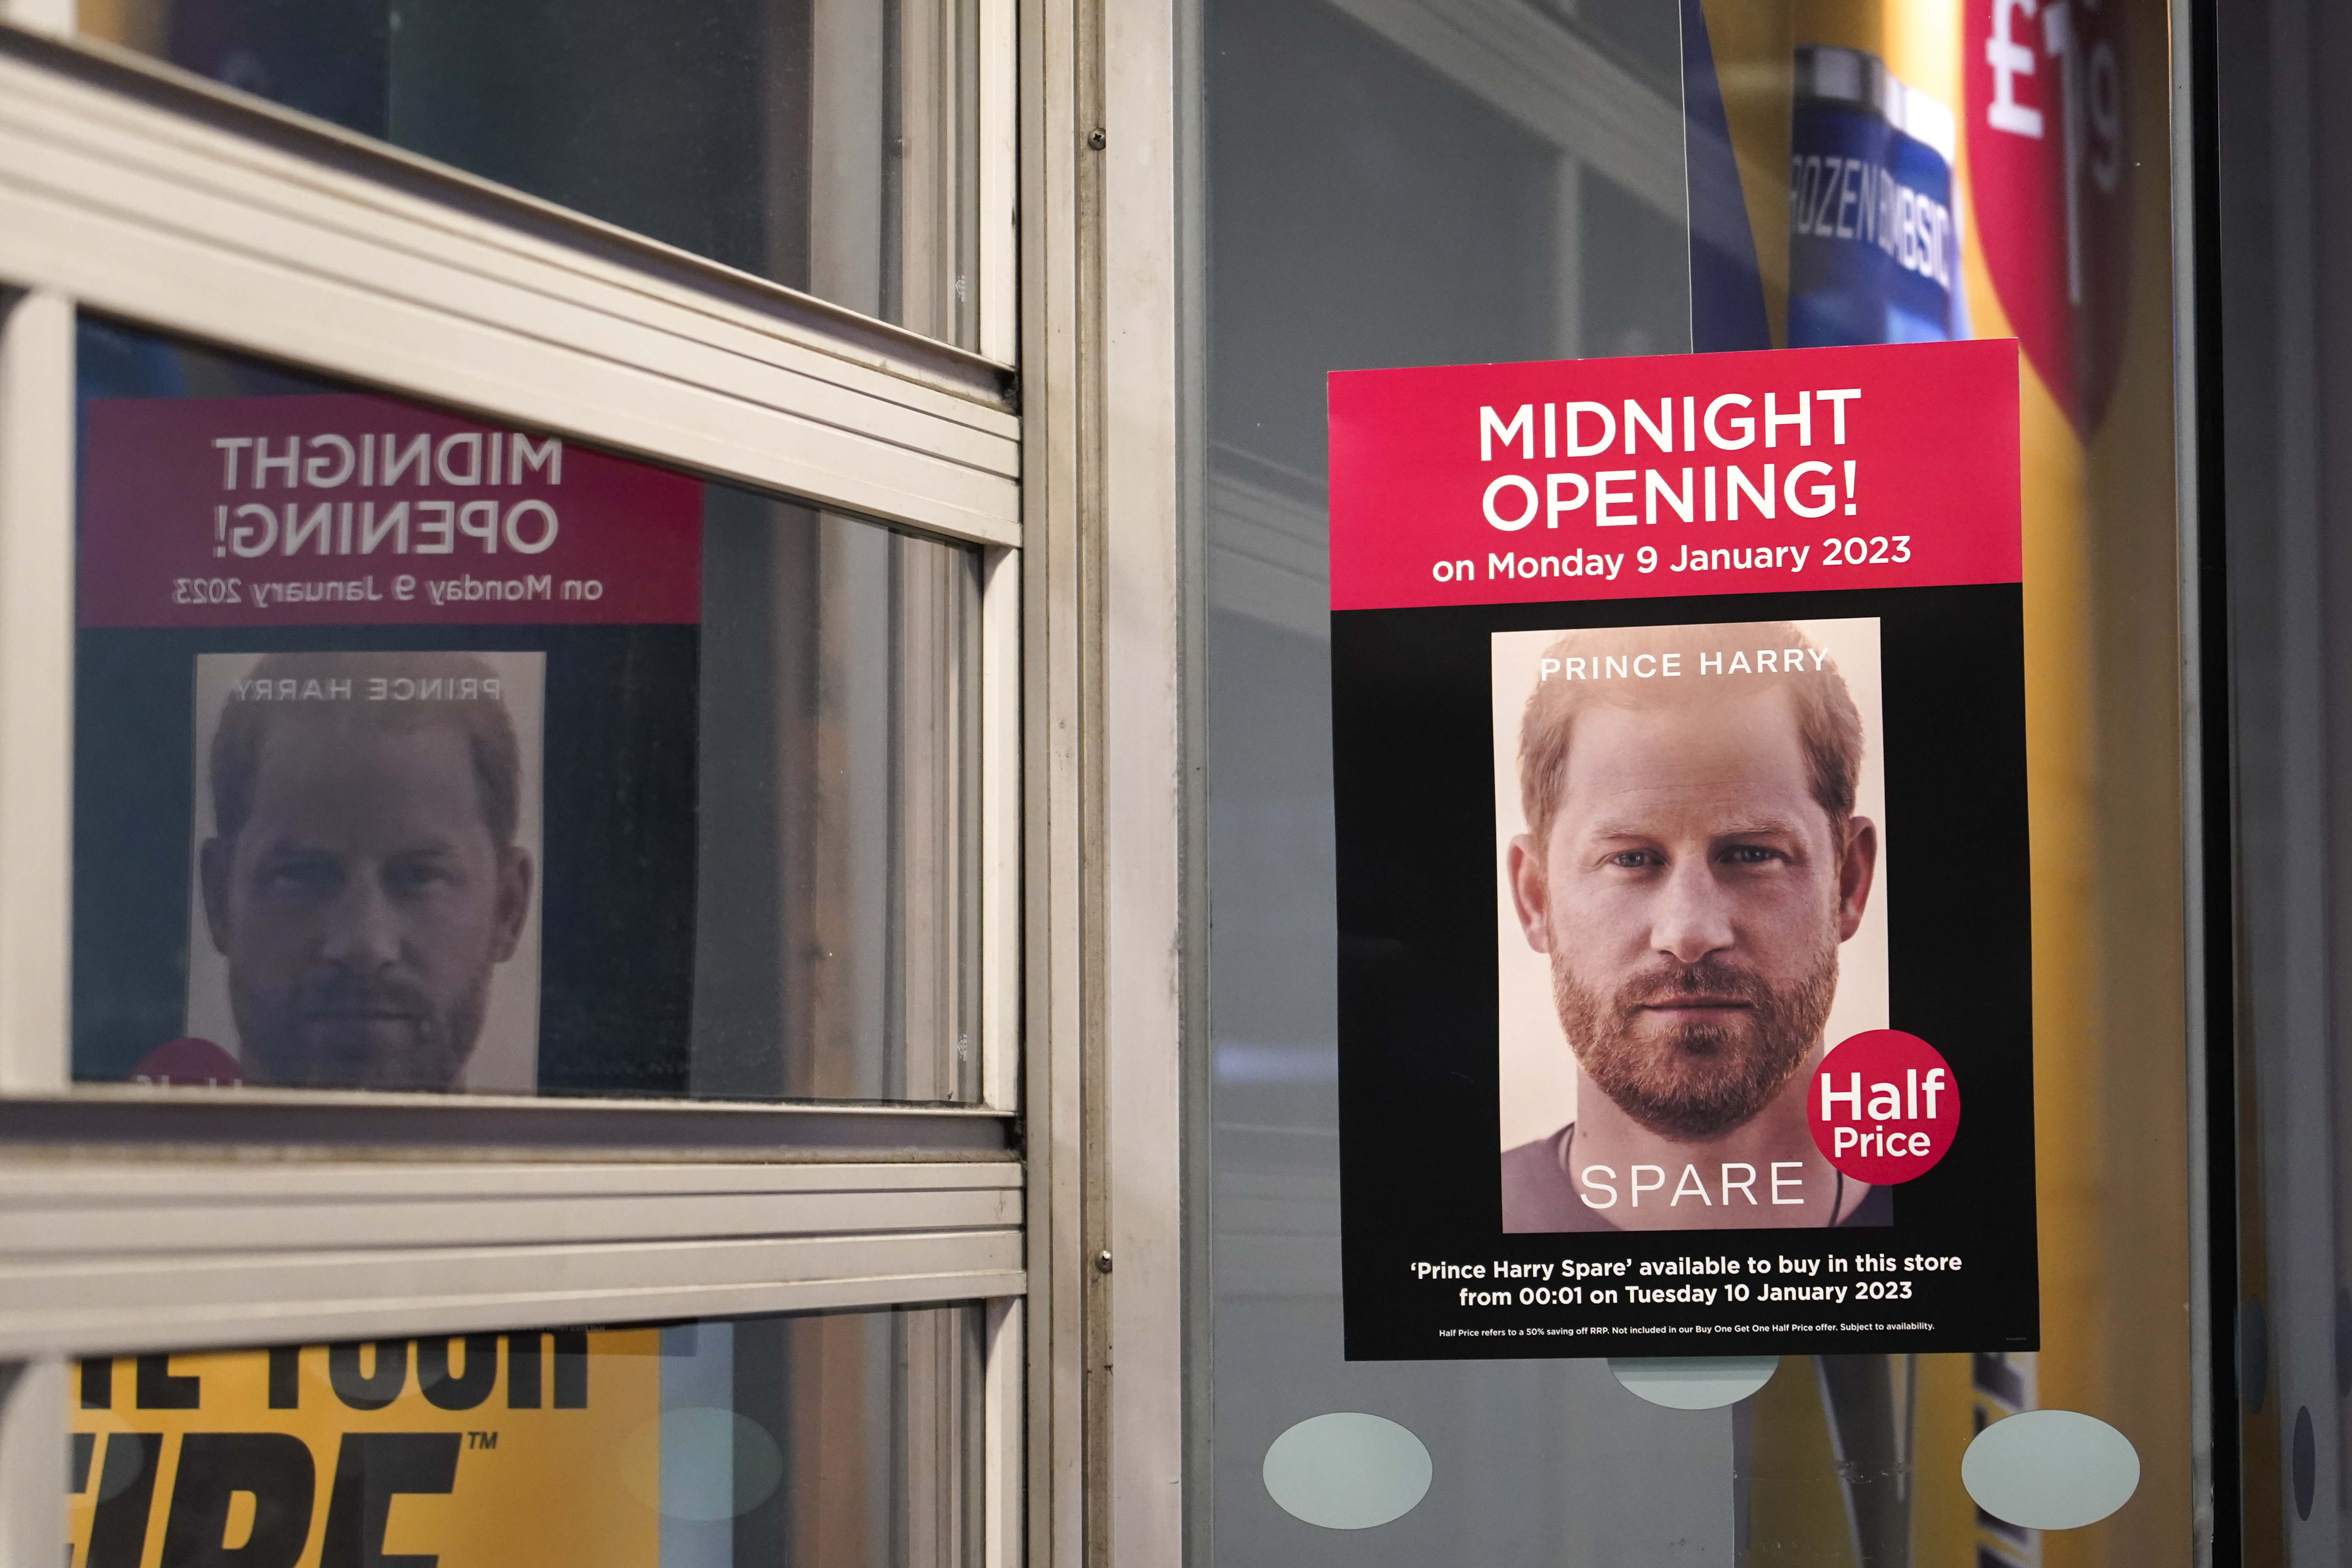 A poster advertises the midnight opening of a store to sell the new book by Prince Harry called "Spare" in London, Tuesday, Jan. 10, 2023. 